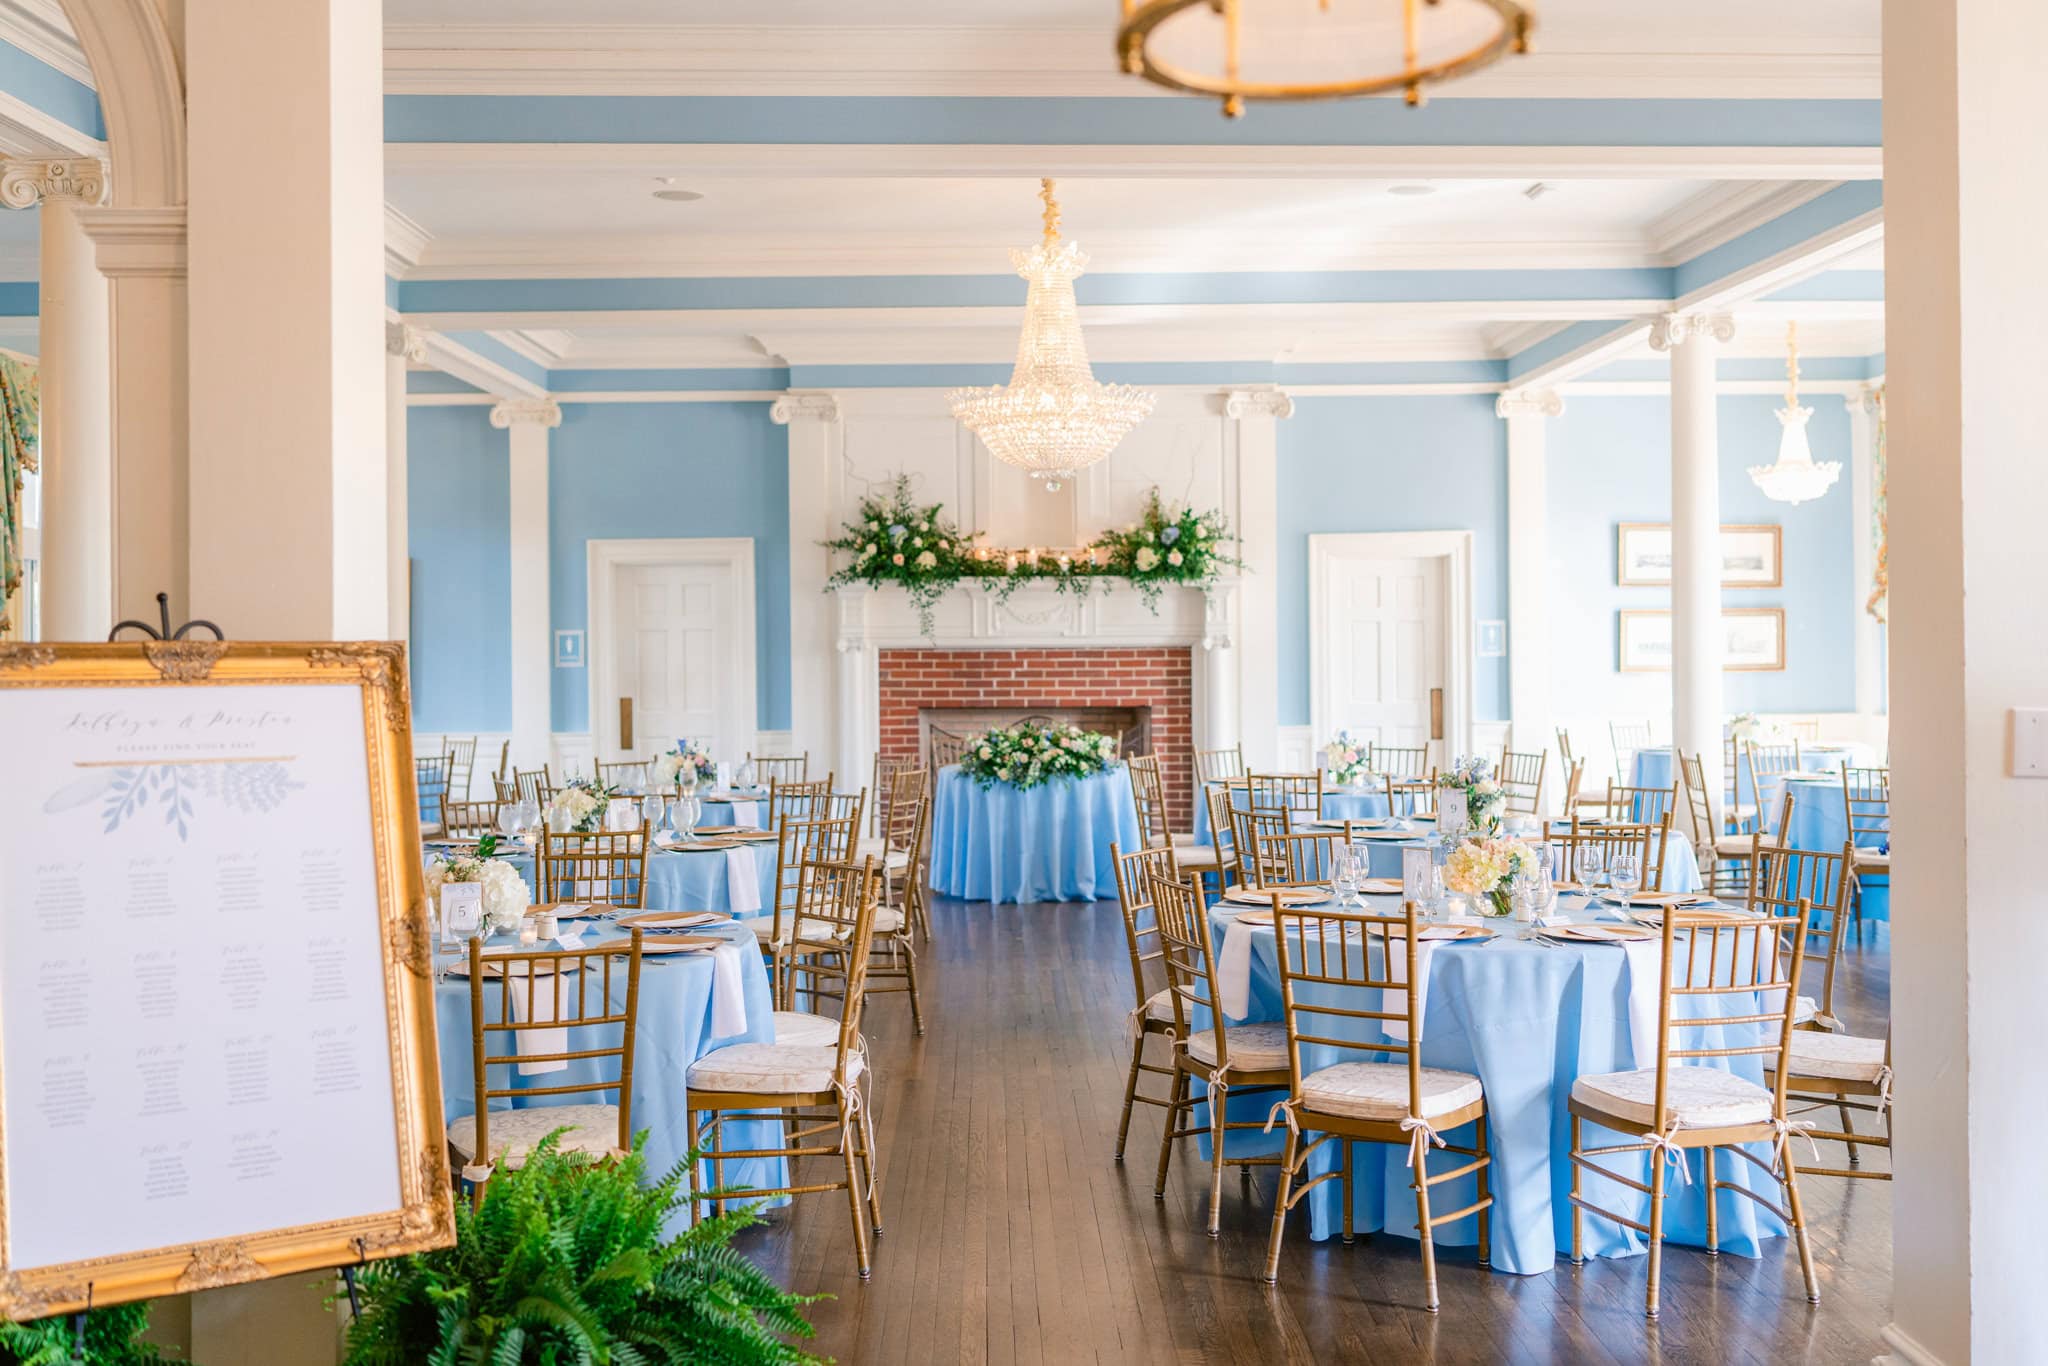 Pine Lakes Country Club Wedding Venue in Myrtle Beach, SC